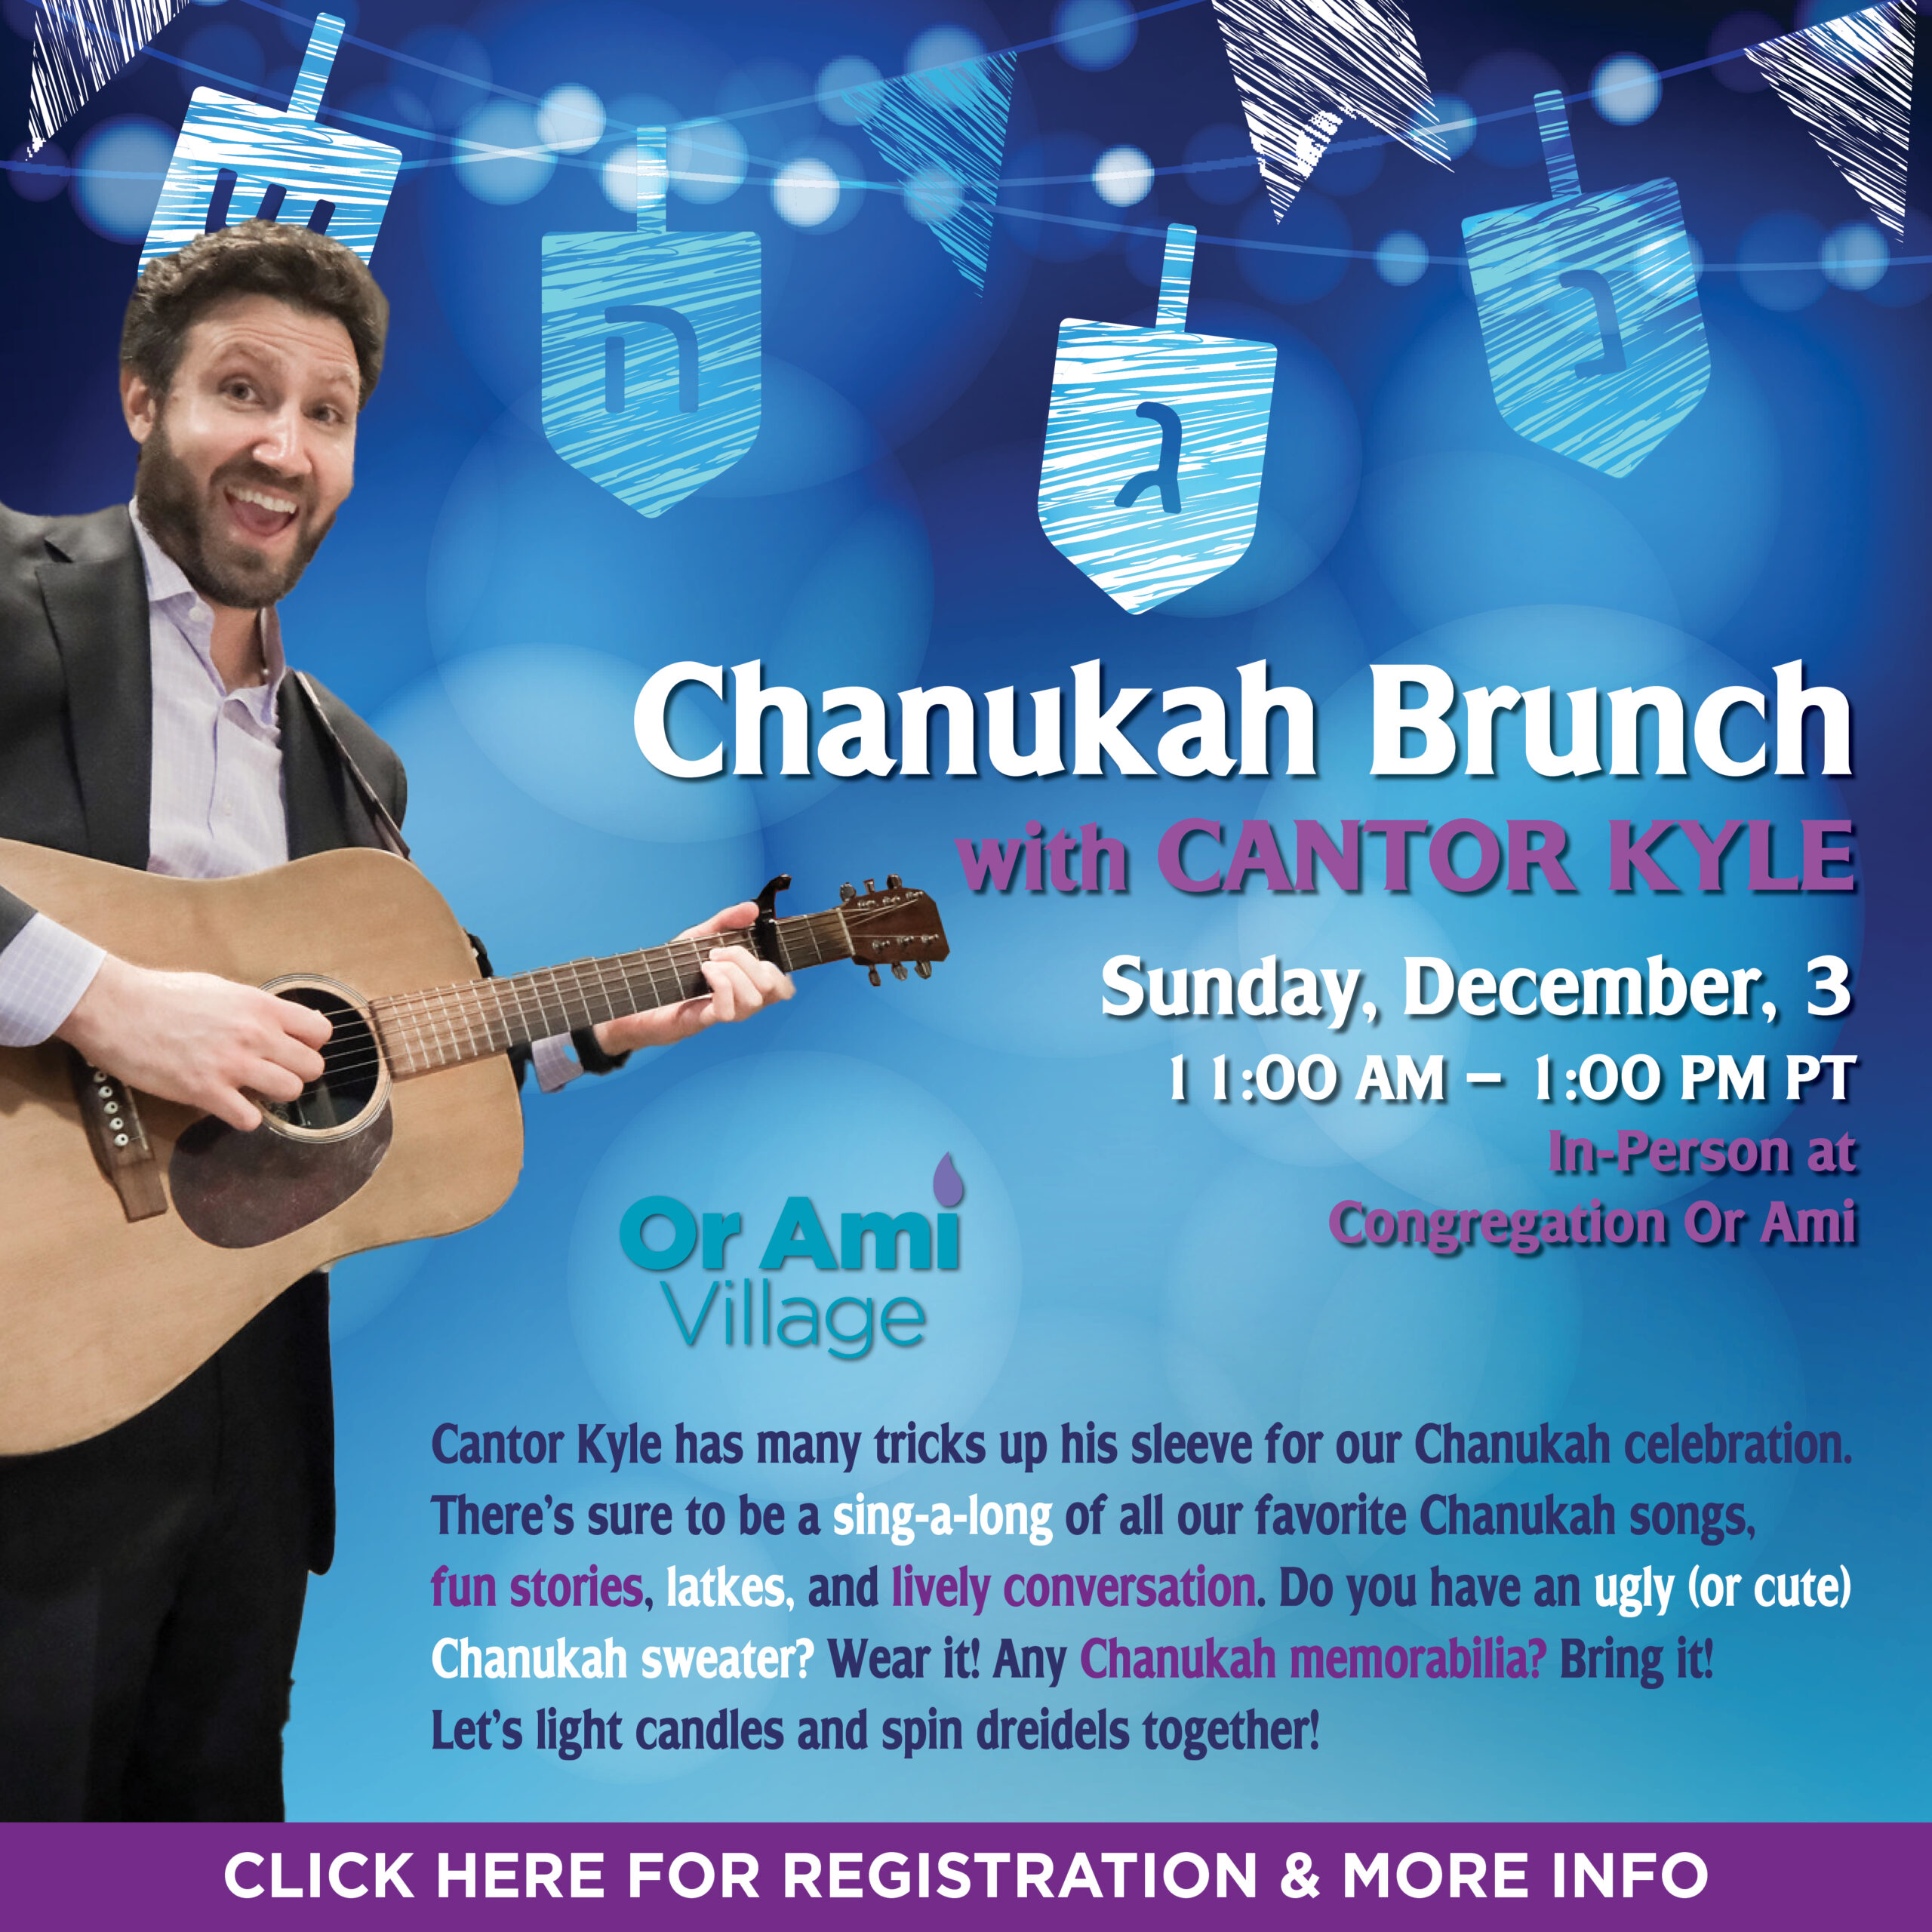 3 Or Ami Village Chanukah Party with Cantor Kyle CLICK